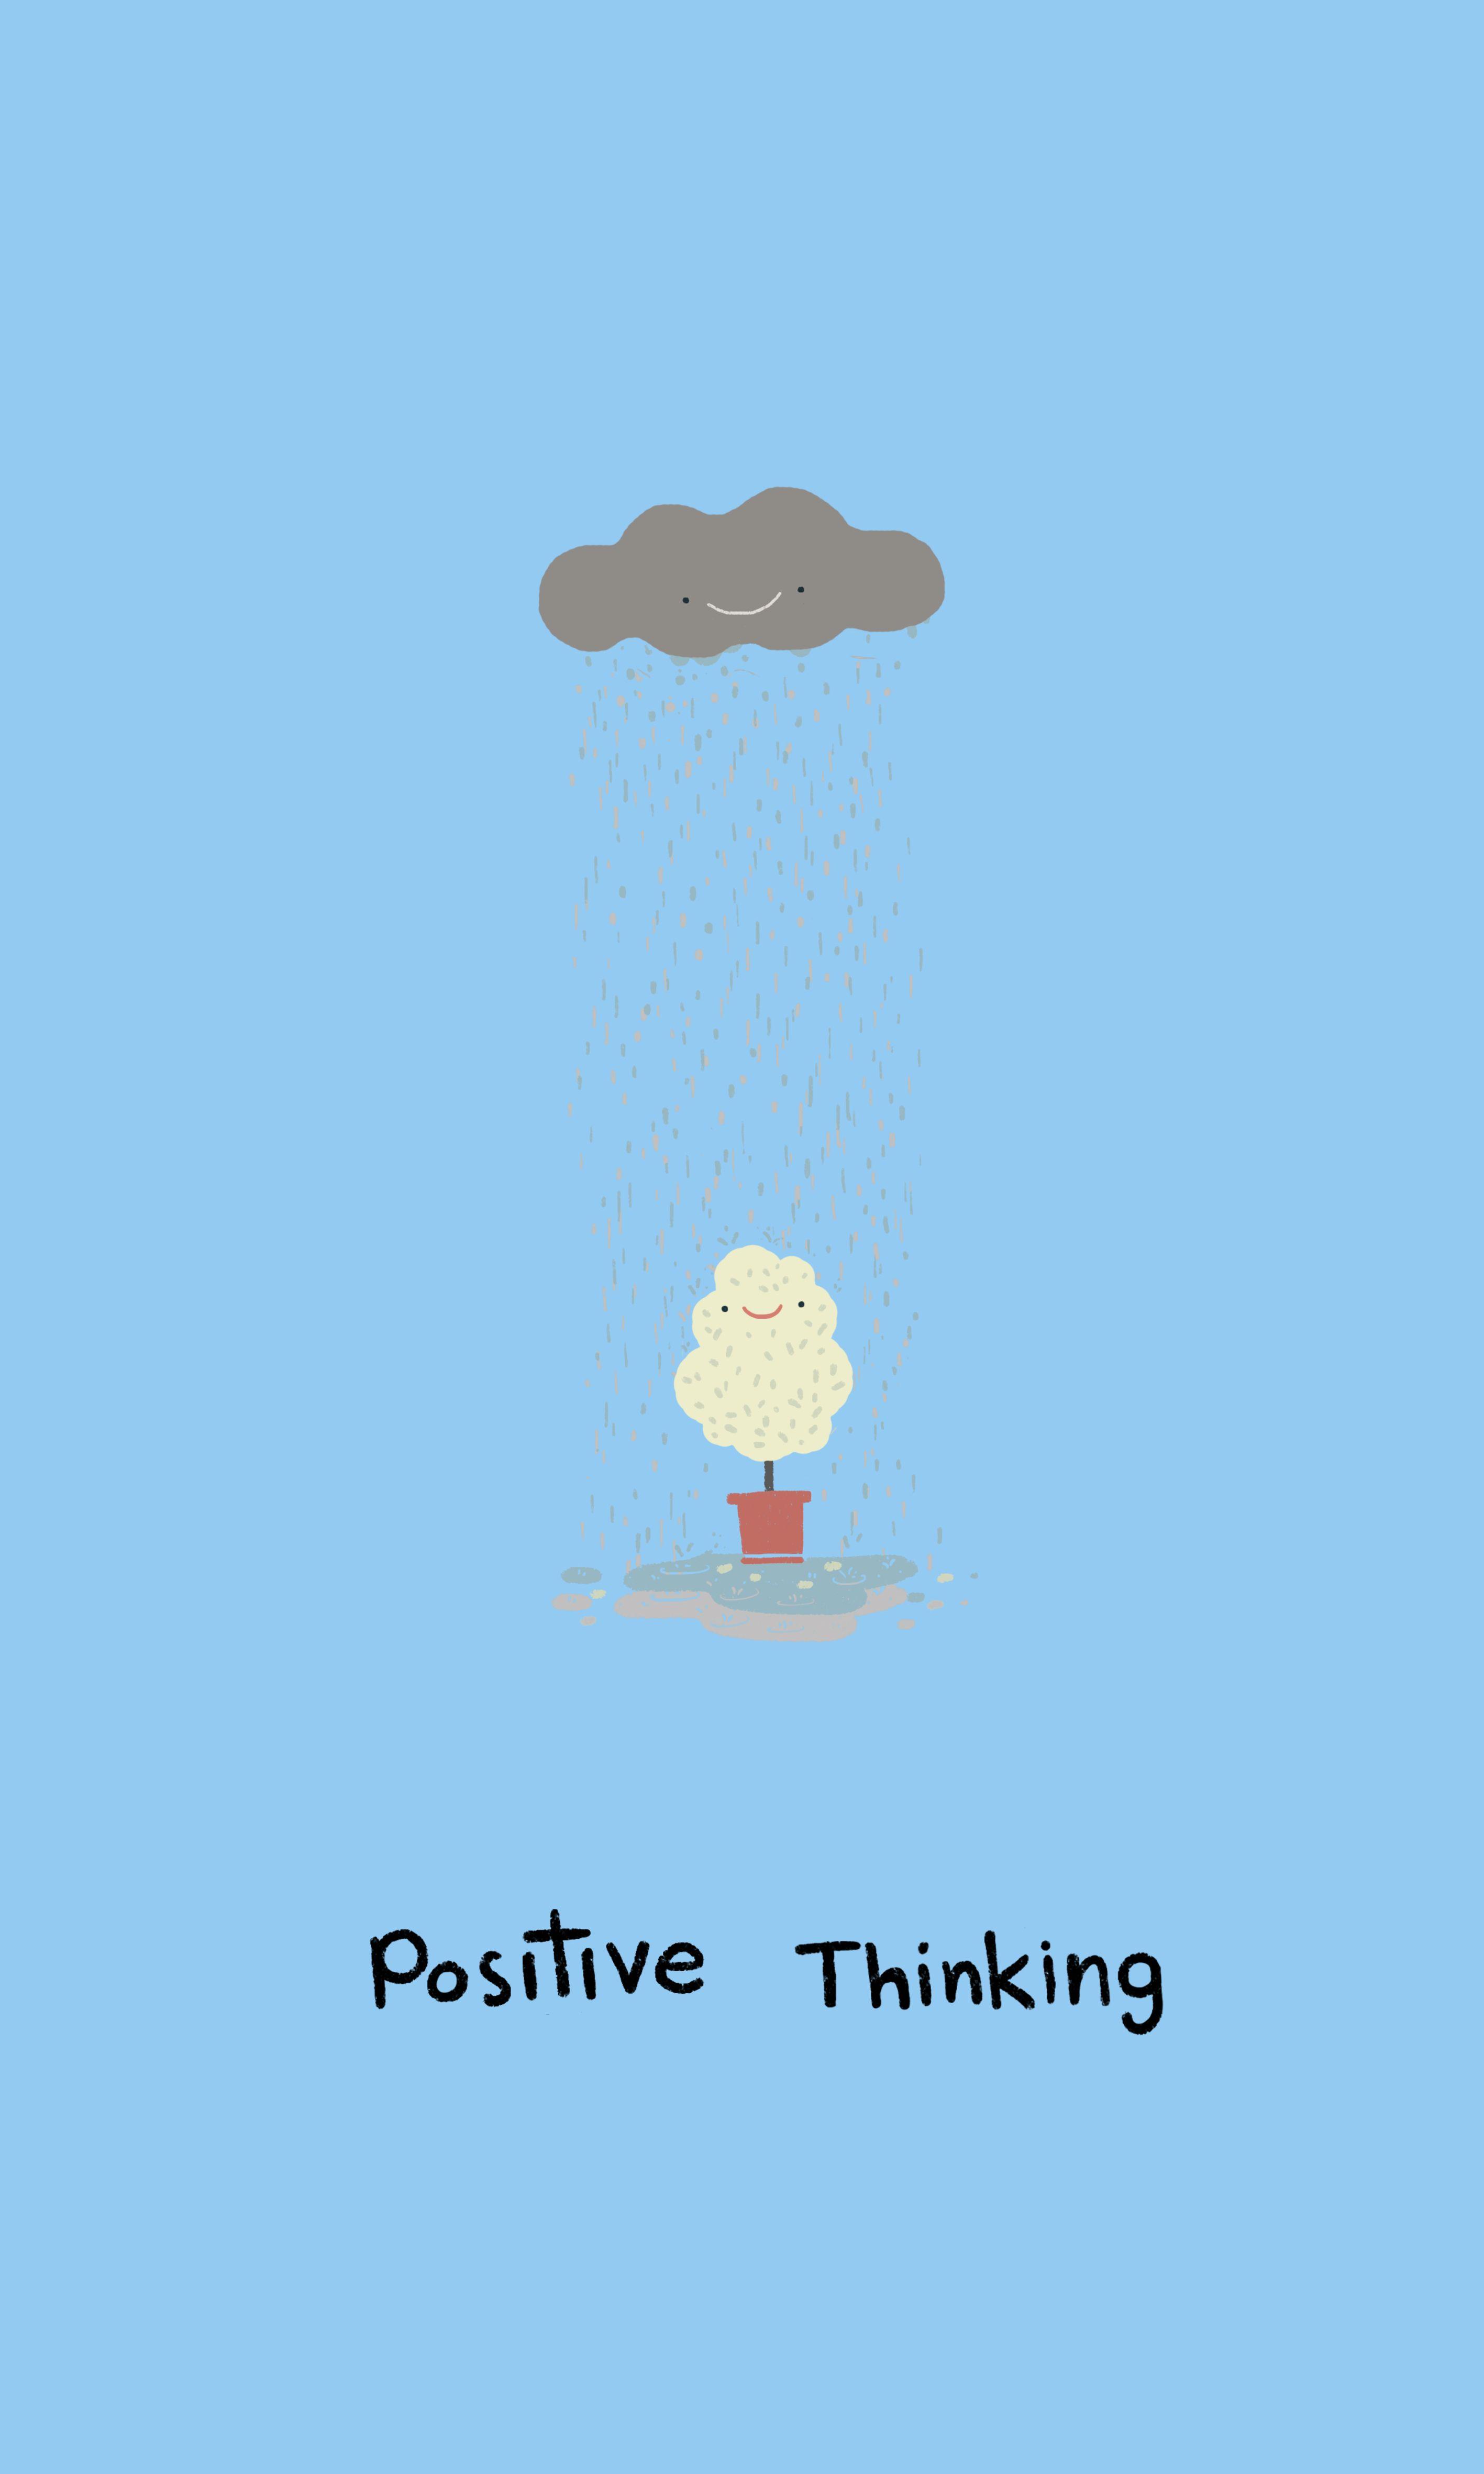 SOOK NO.31, POSITIVE THINGING (For Phone 240*460 px). Cute